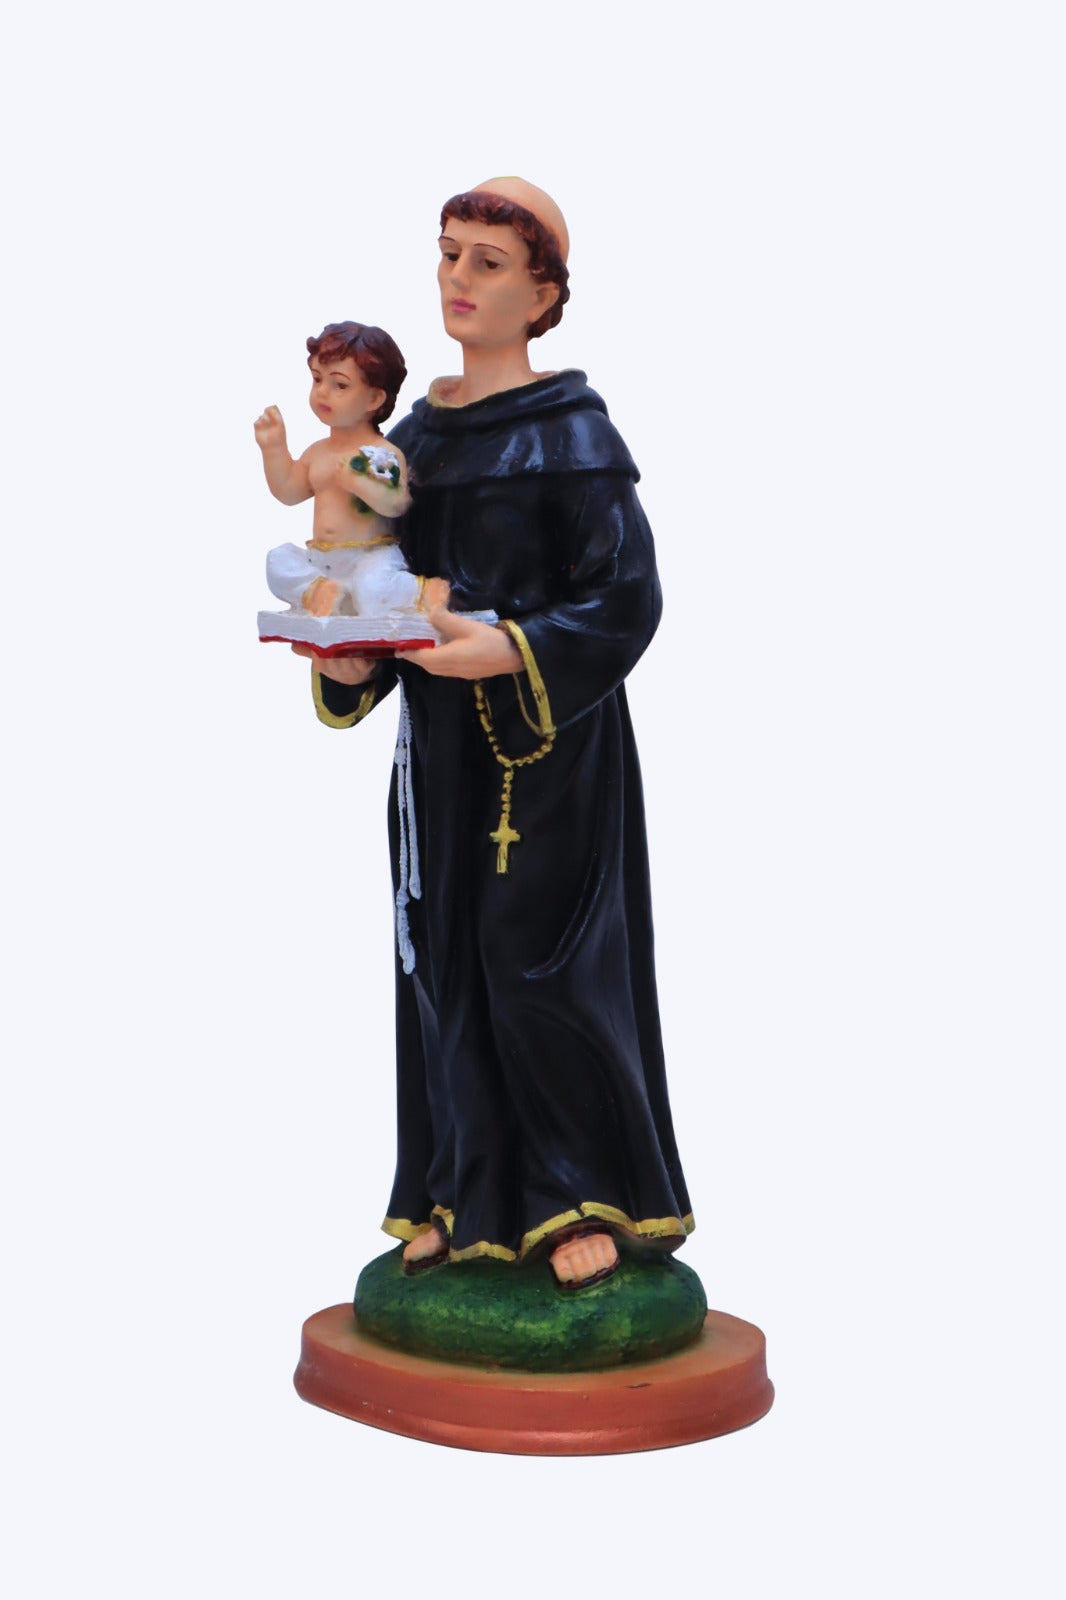 St. Anthony 12 Inch Statue | Living Words Christian Website